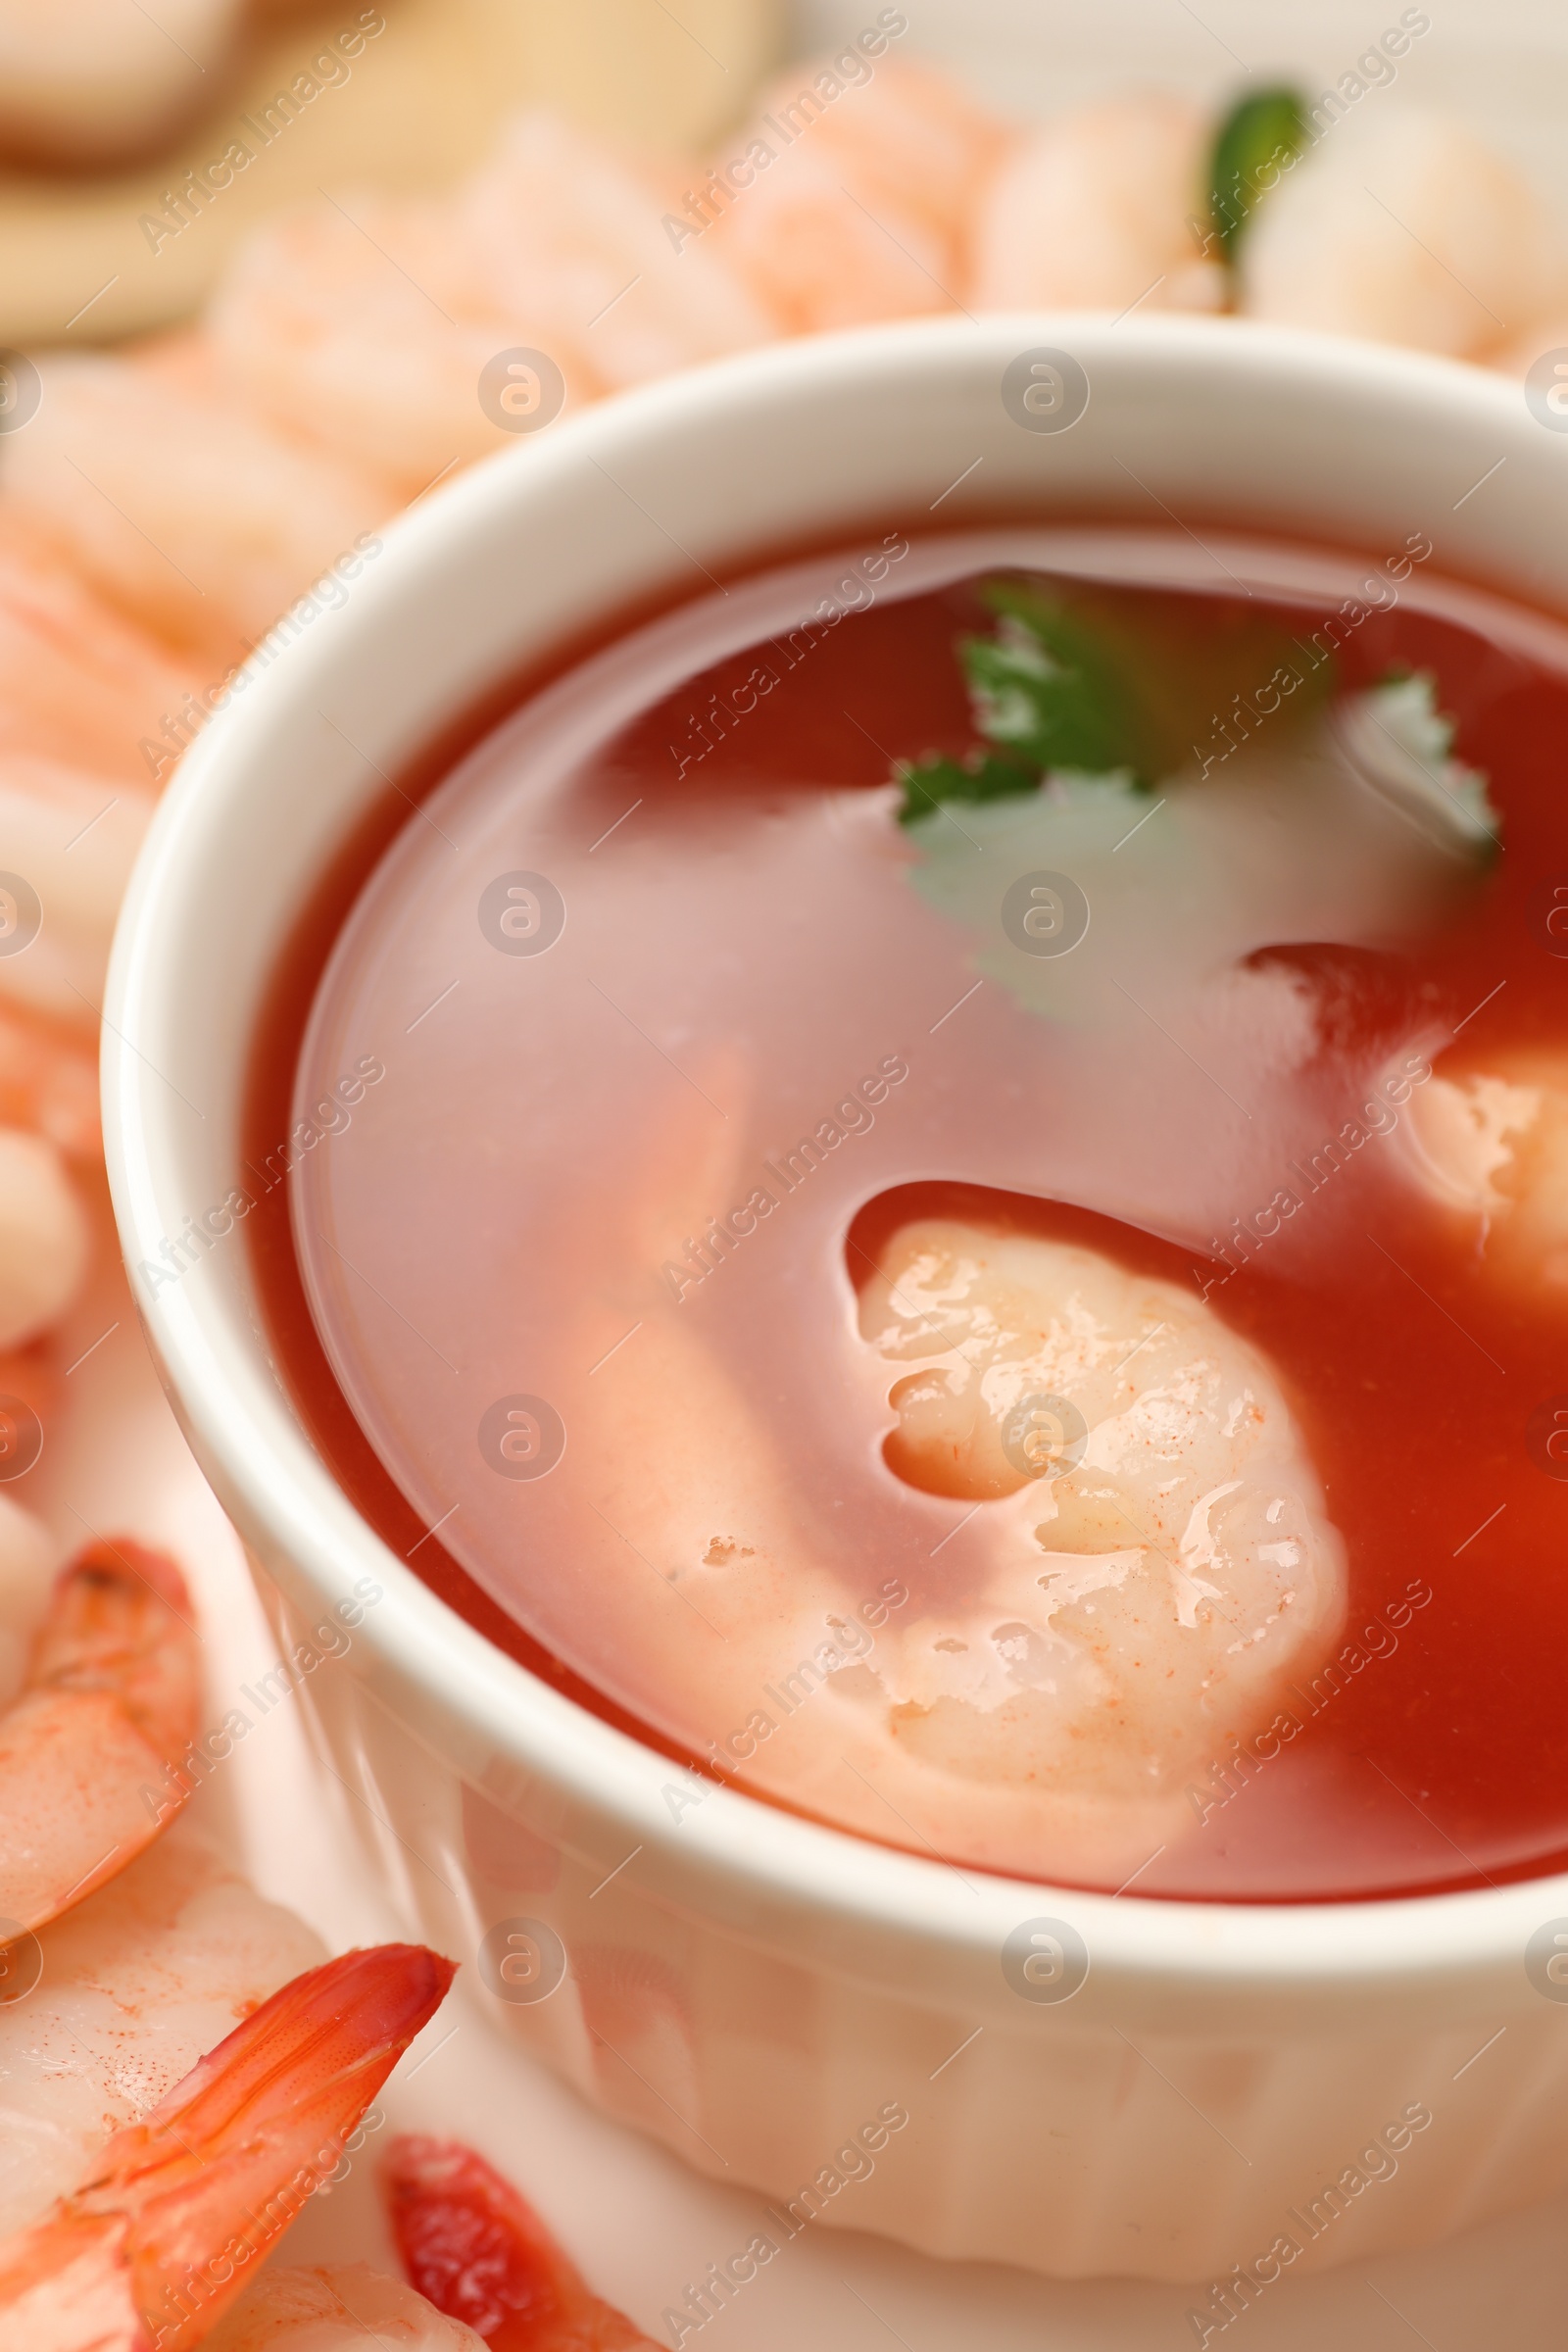 Photo of Tasty boiled shrimps with cocktail sauce, chili and parsley on table, closeup